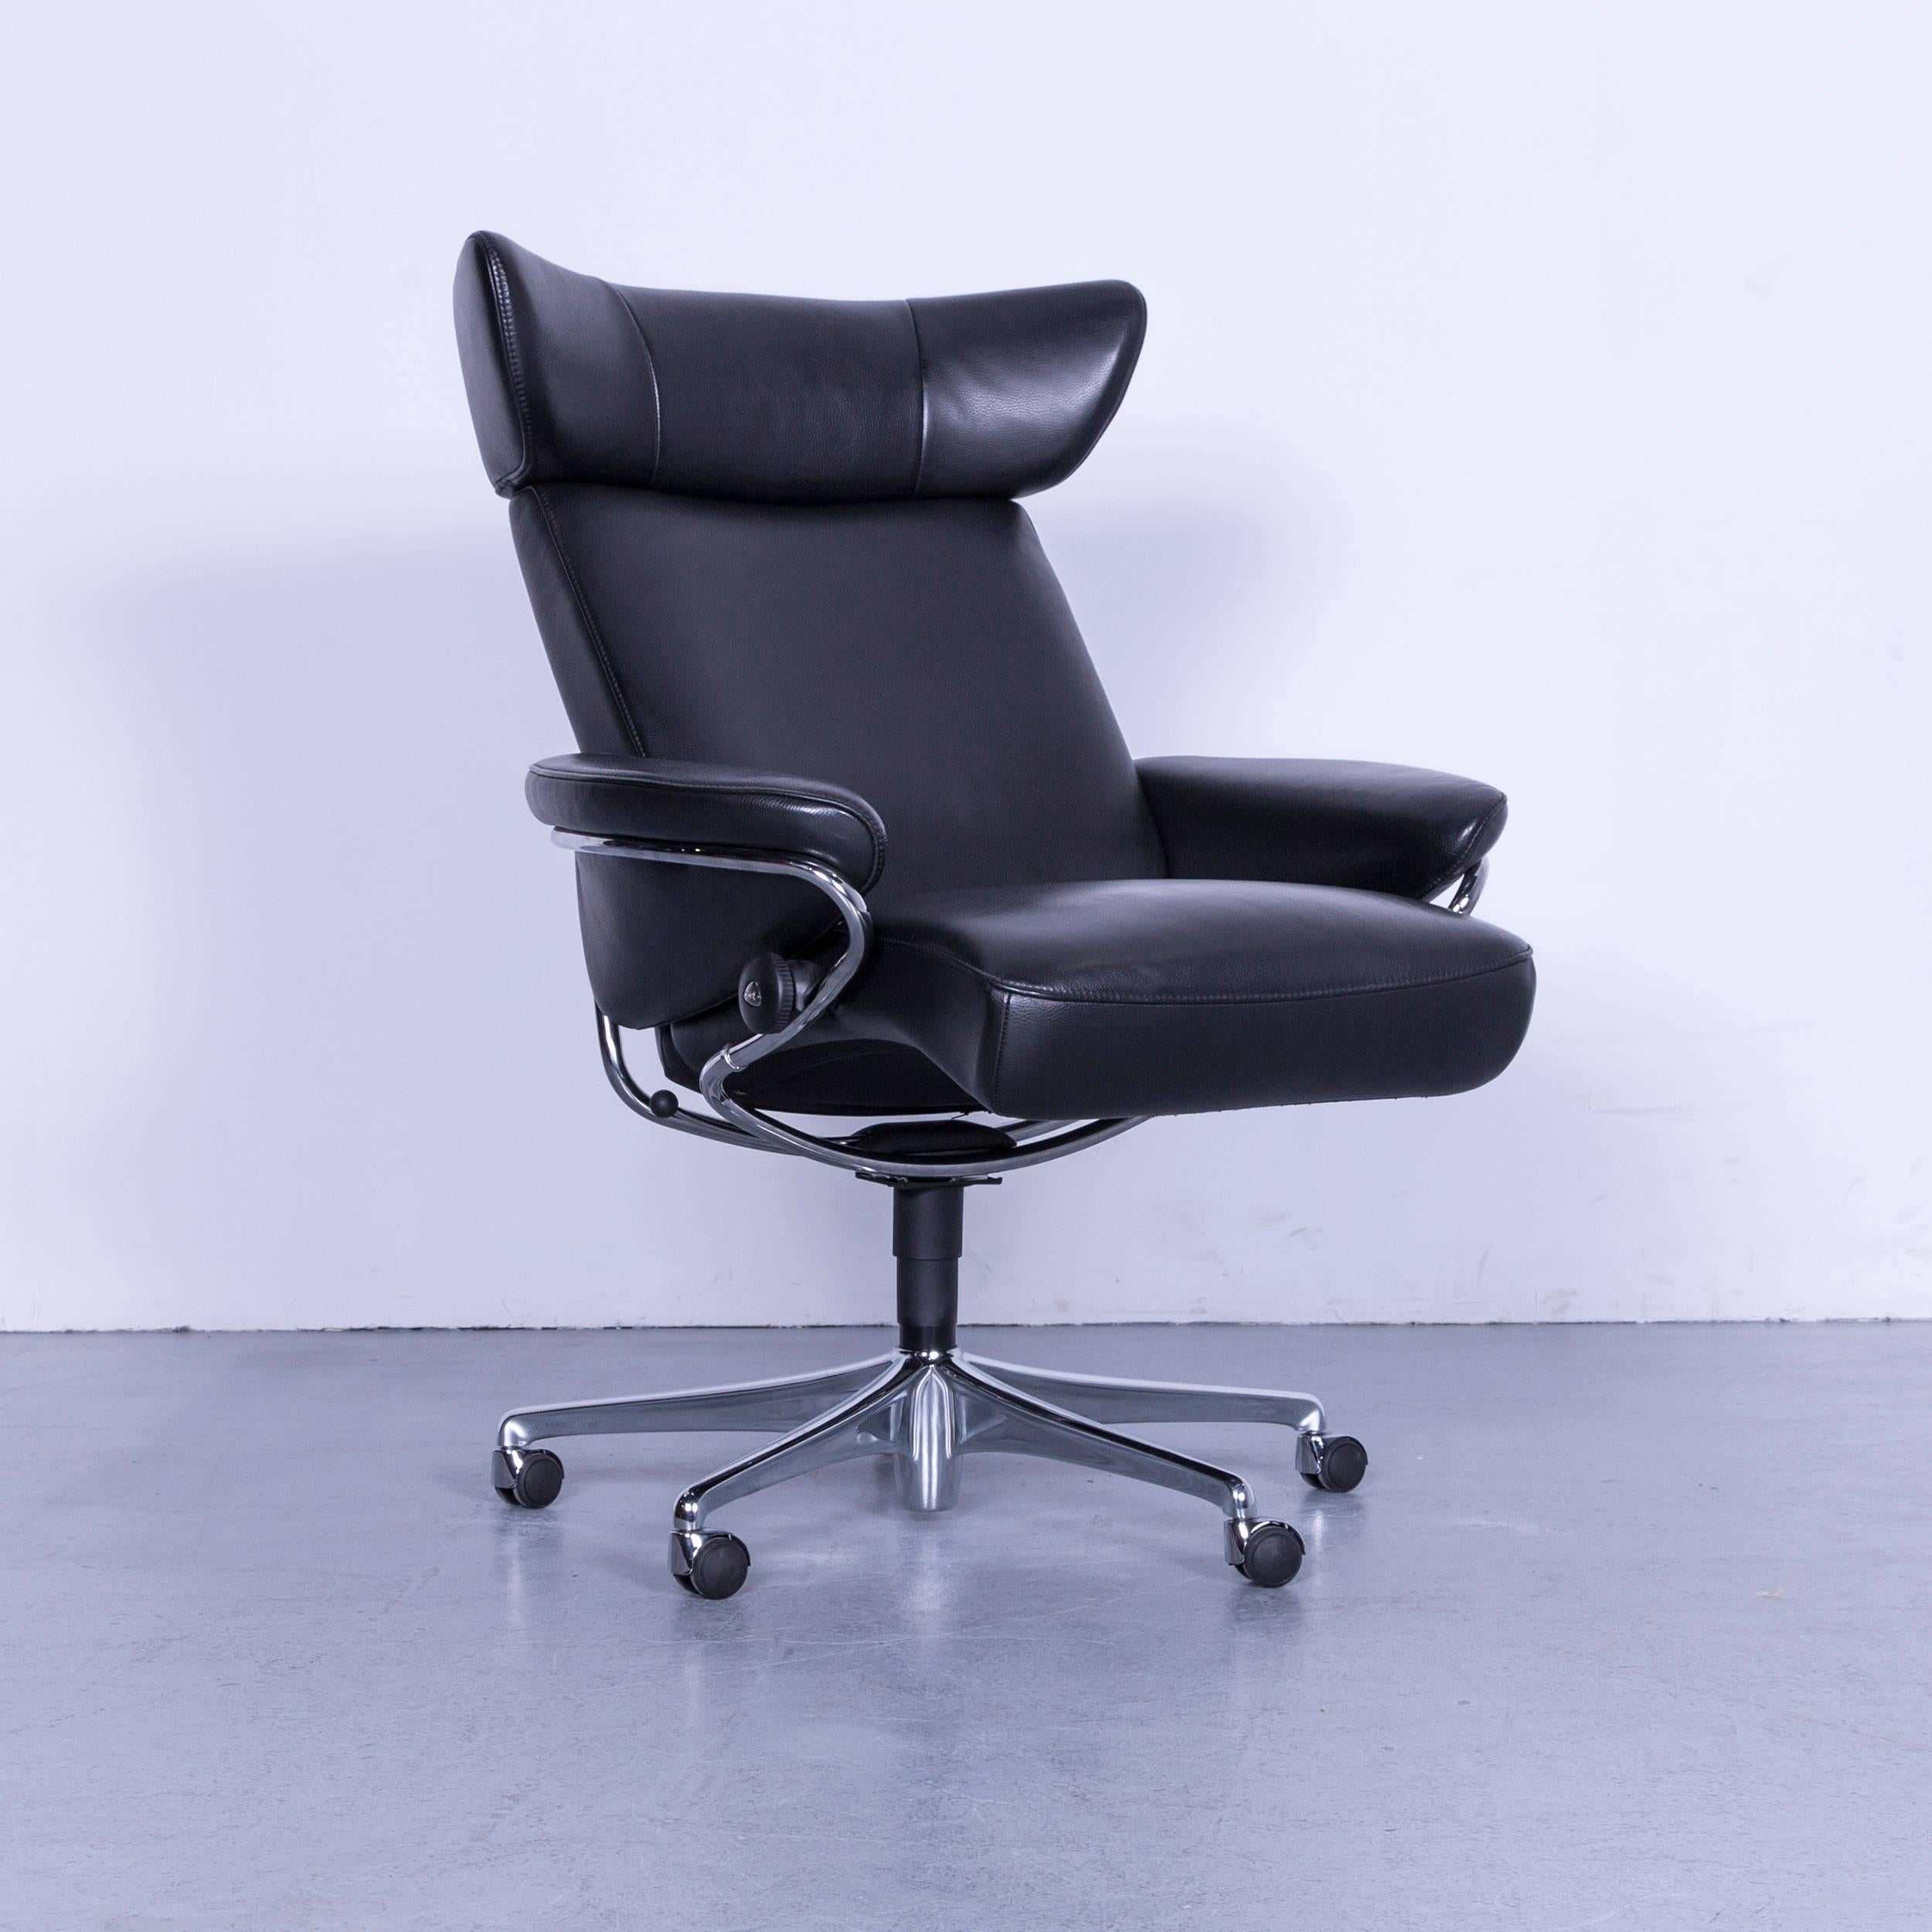 Stressless Jazz designer leather office chair black with footstool and function.